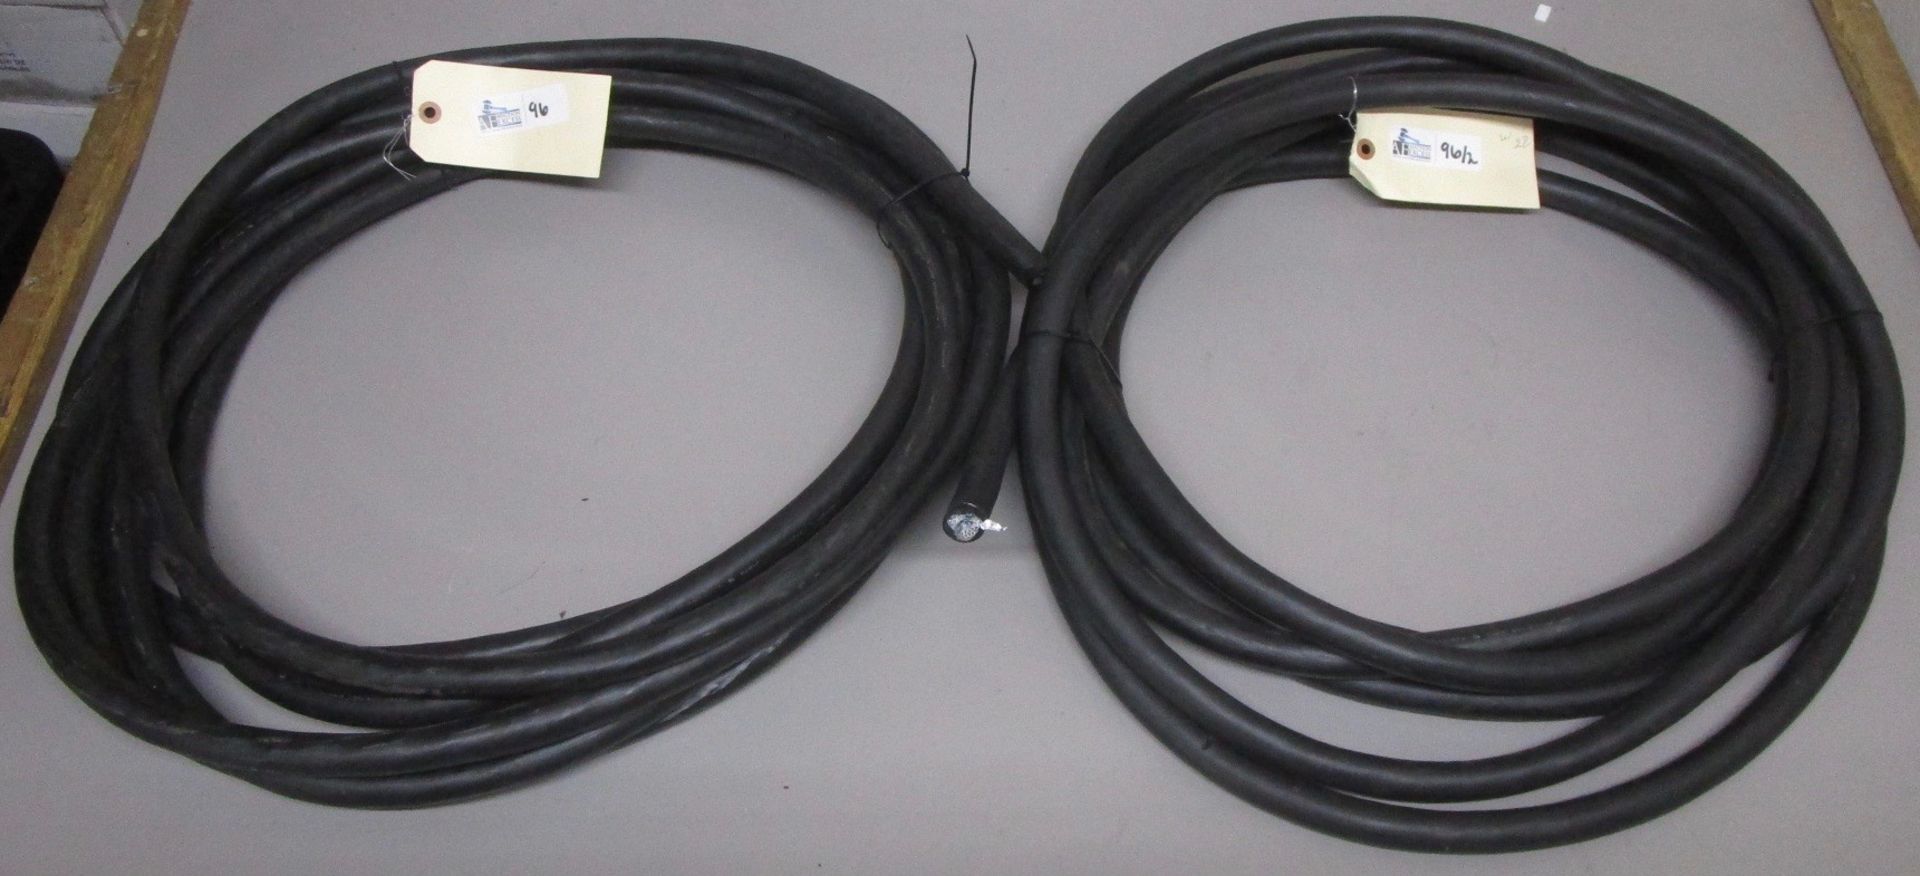 LOT OF 2 USED GEPCO AUDIO MULTS 2668 APPX 25' EACH ABM STYLE VW-1